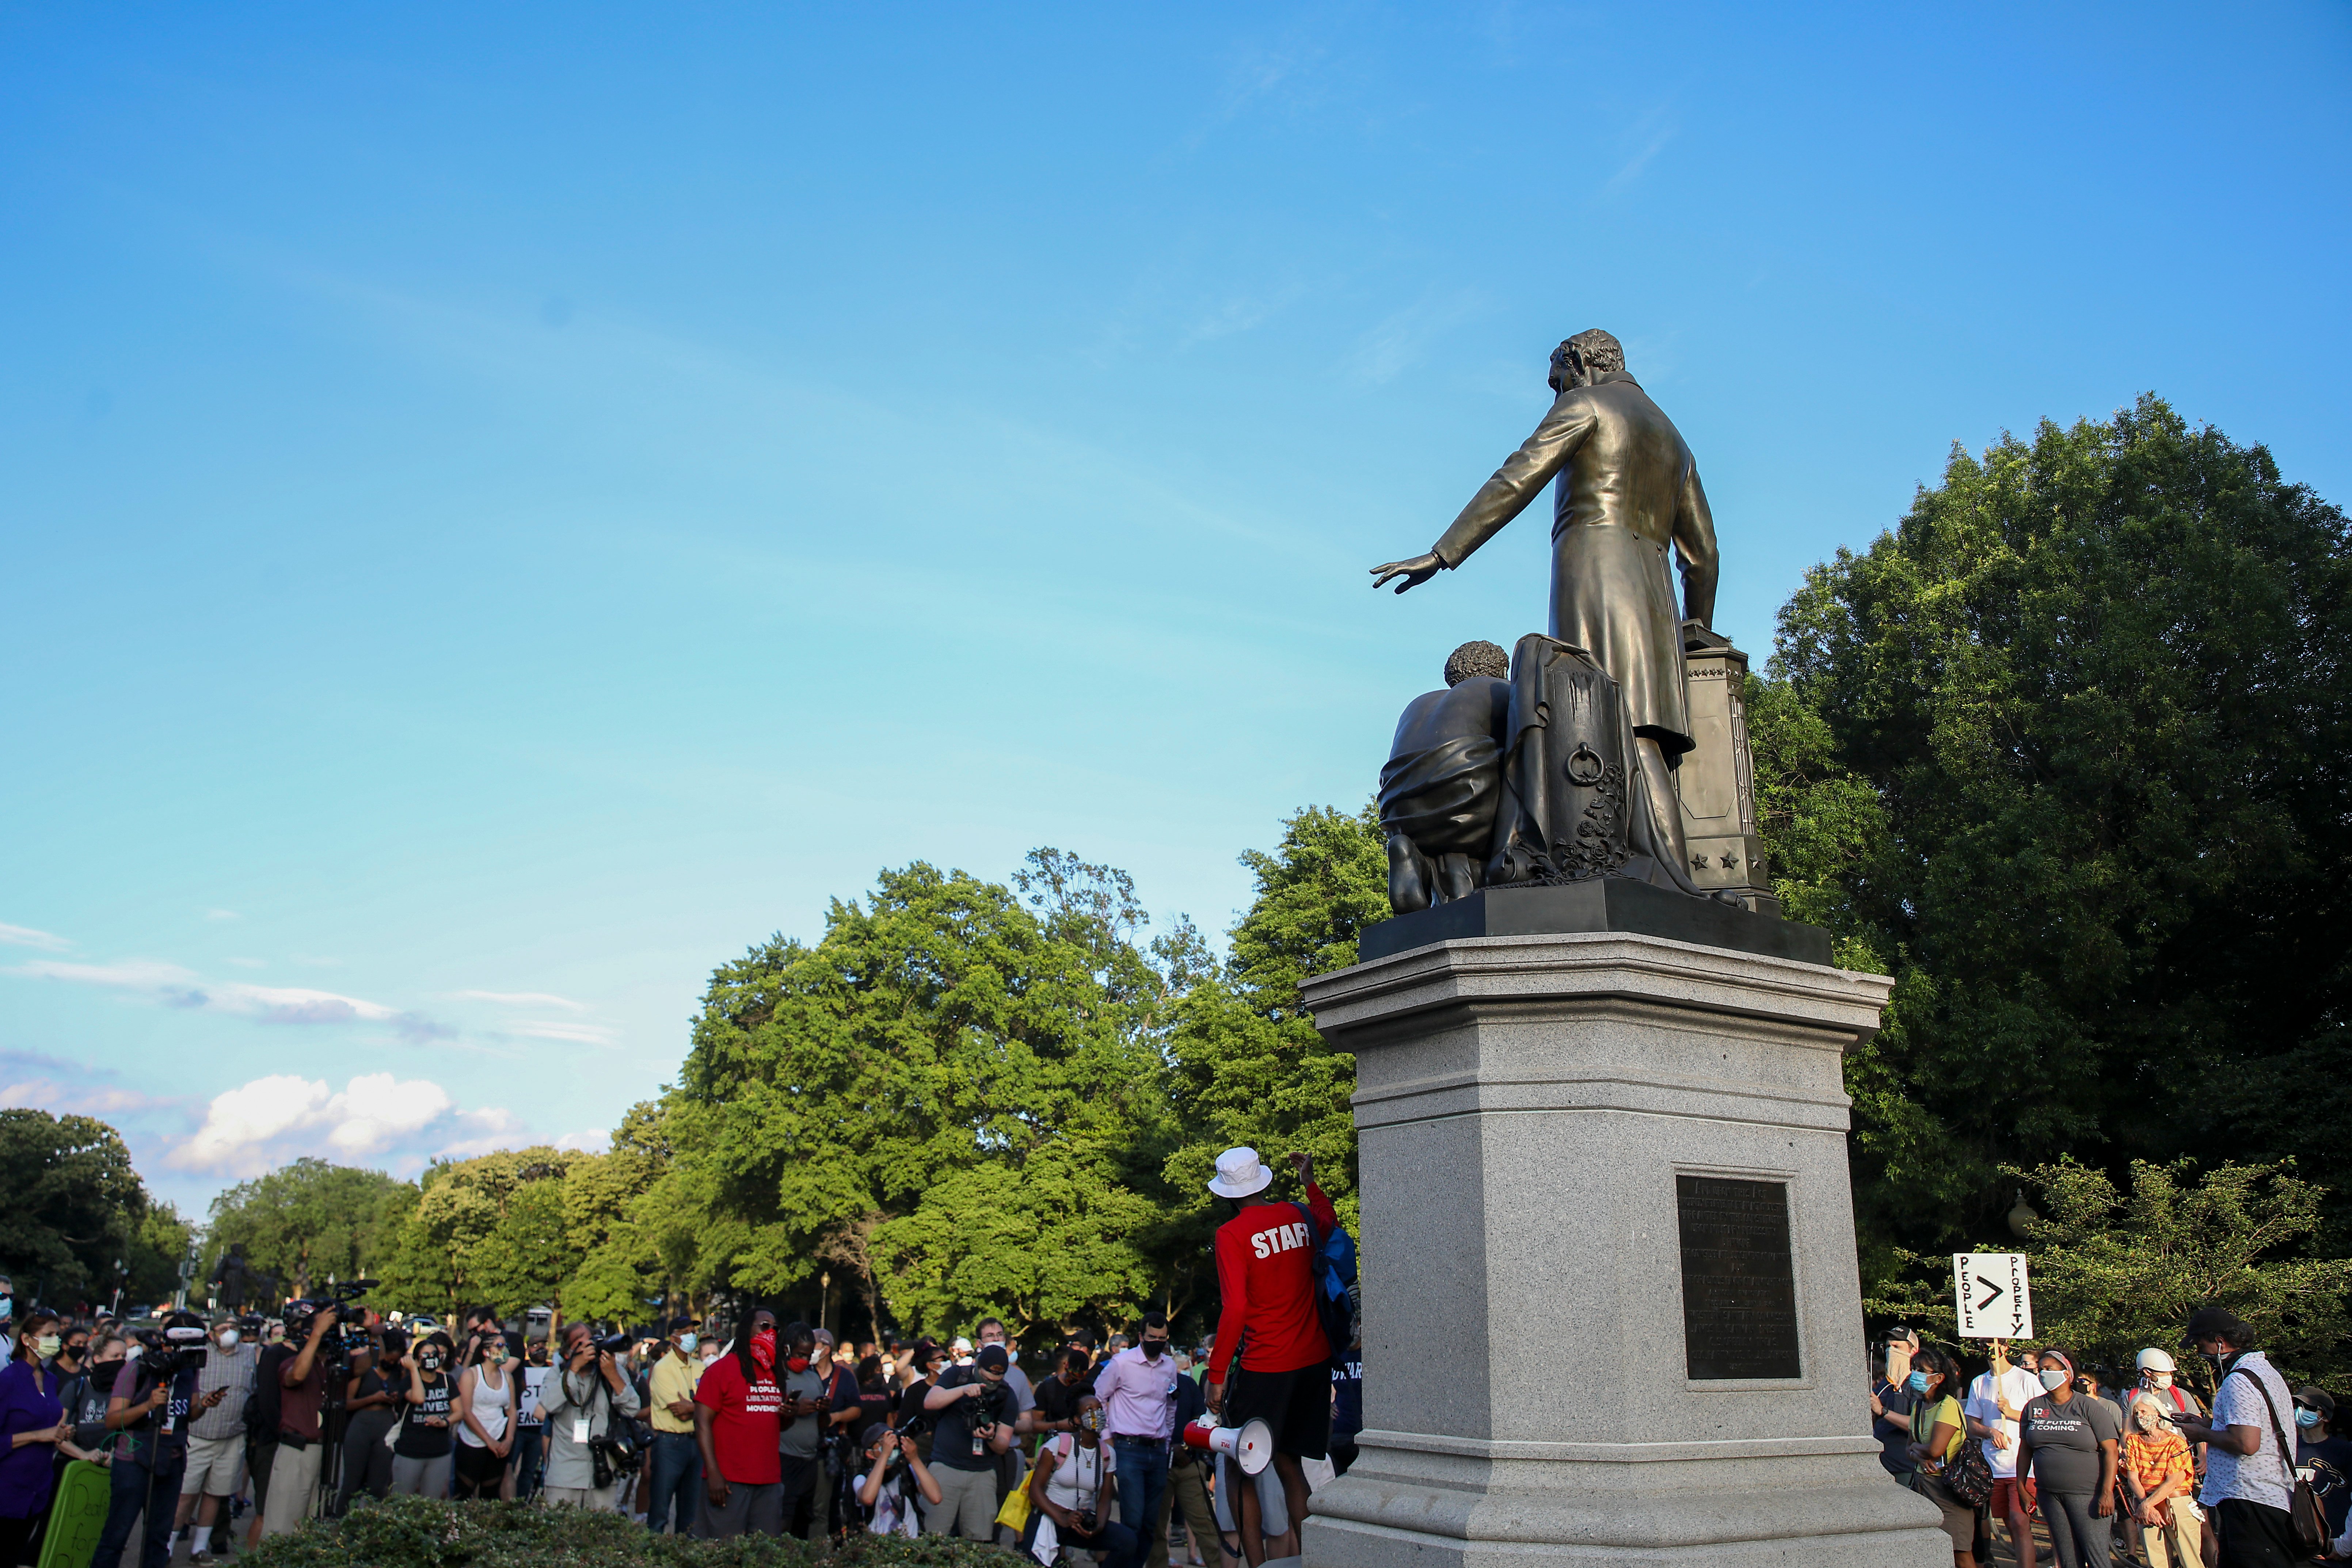 WASHINGTON, DC - JUNE 23: Protesters gather at Lincoln Park to demand the Emancipation Memorial be taken down on June 23, 2020 in Washington, DC. Protesters have been demanding the removal of statues after the death of African Americans while in police custody. (Photo by Tasos Katopodis/Getty Images)